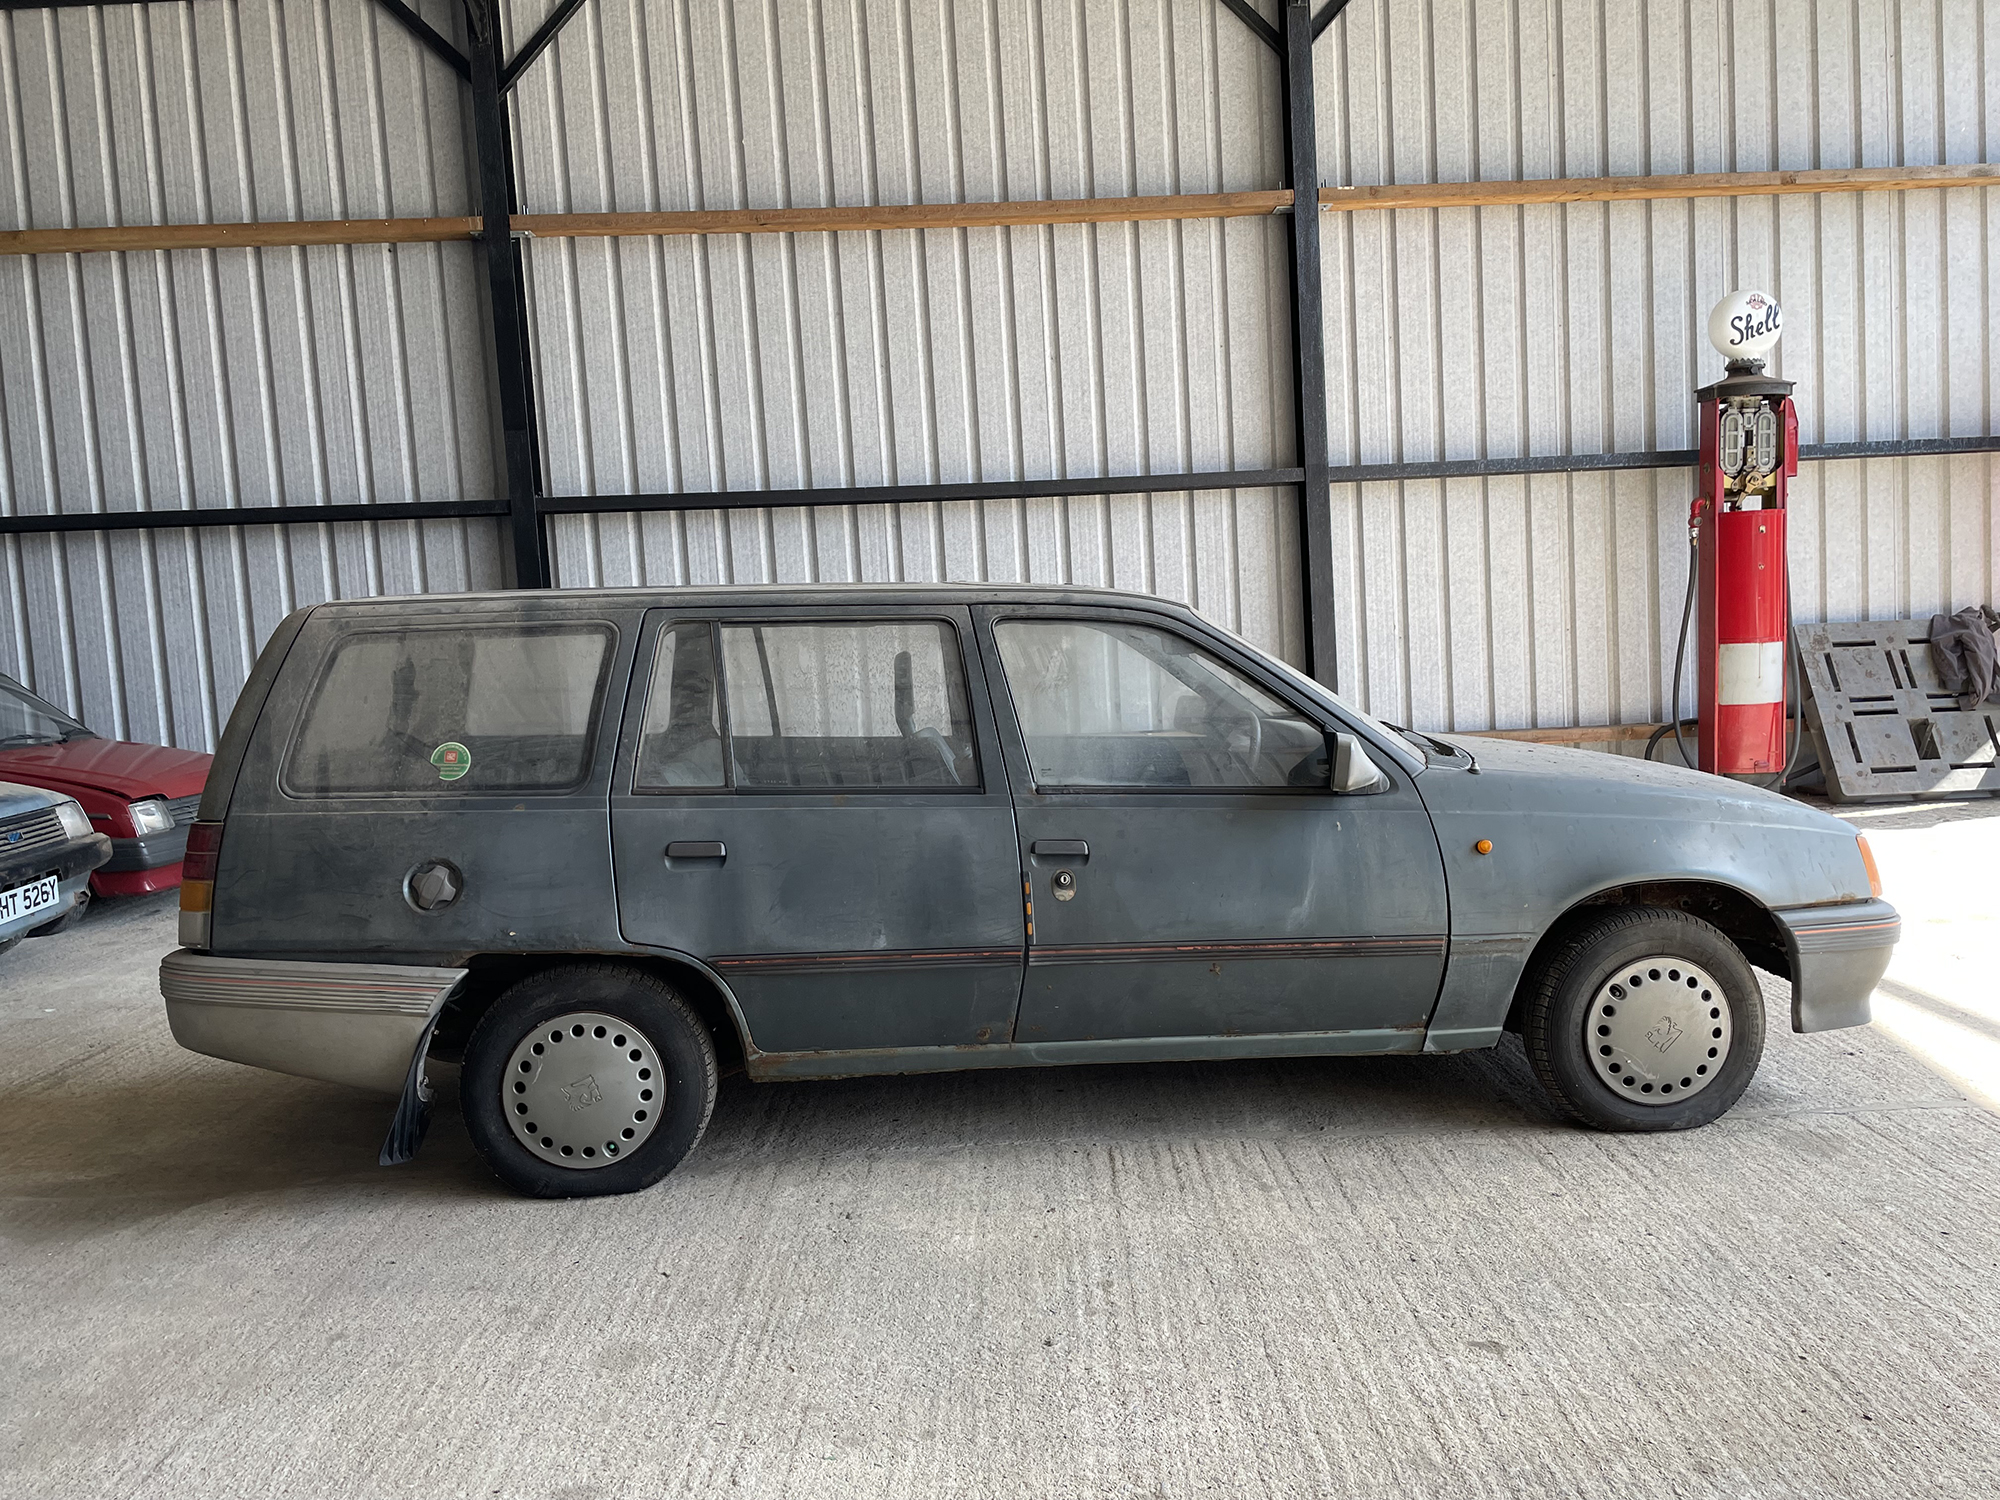 1986 Vauxhall Astra Estate Reg. no. C756 WDG Chassis no. W0L0004662557458 - Image 4 of 14